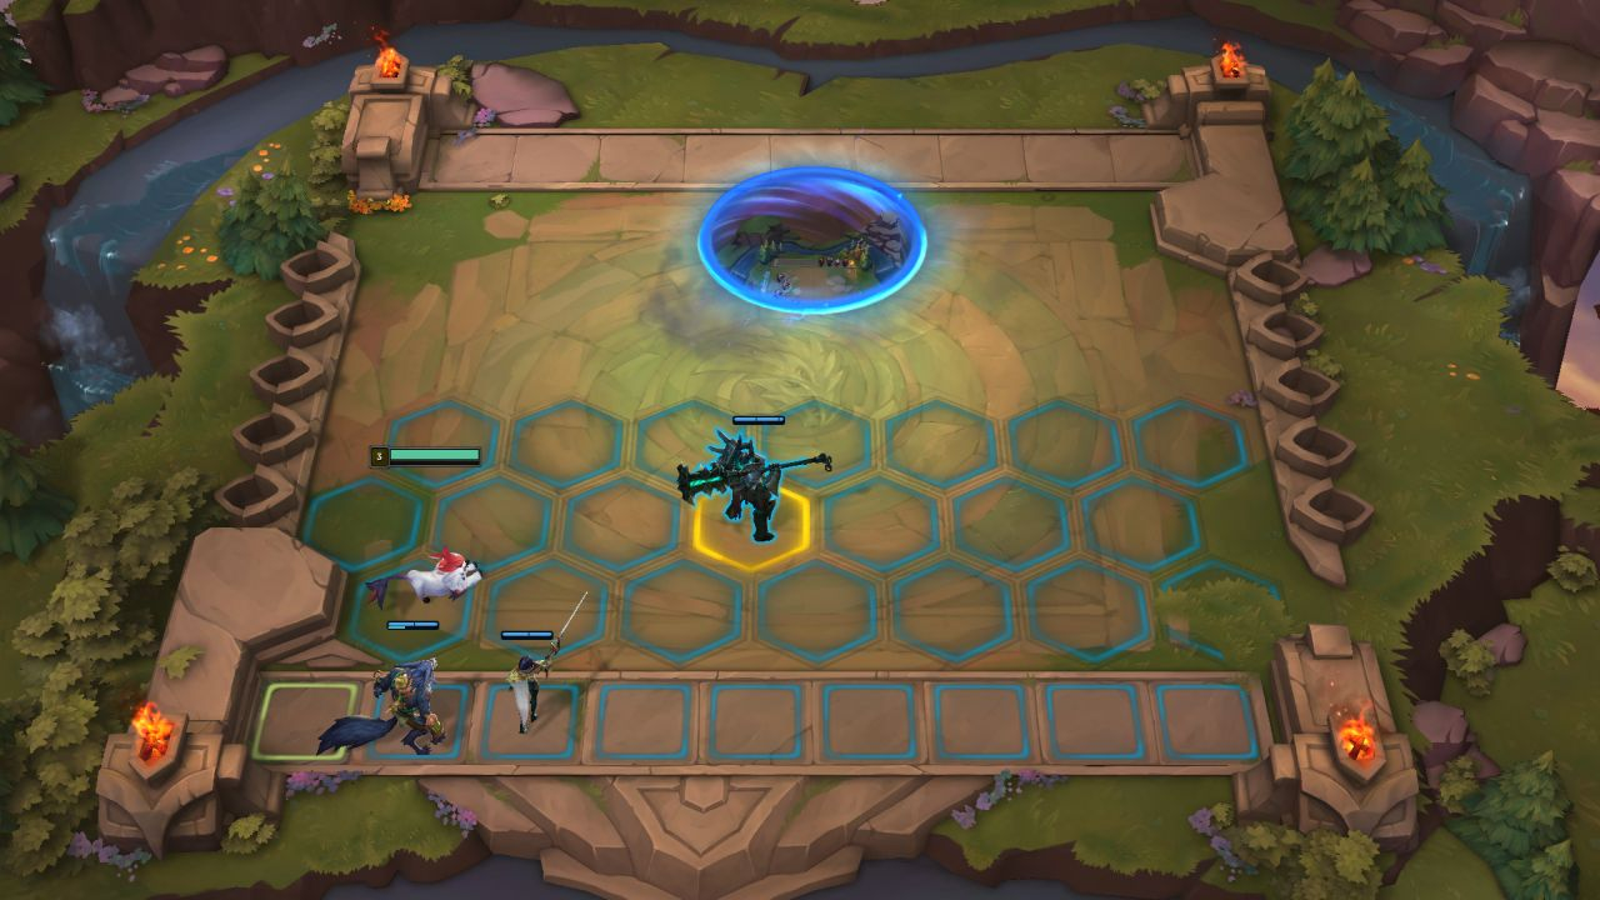 Auto Chess comes full circle with its own MOBA spin-off